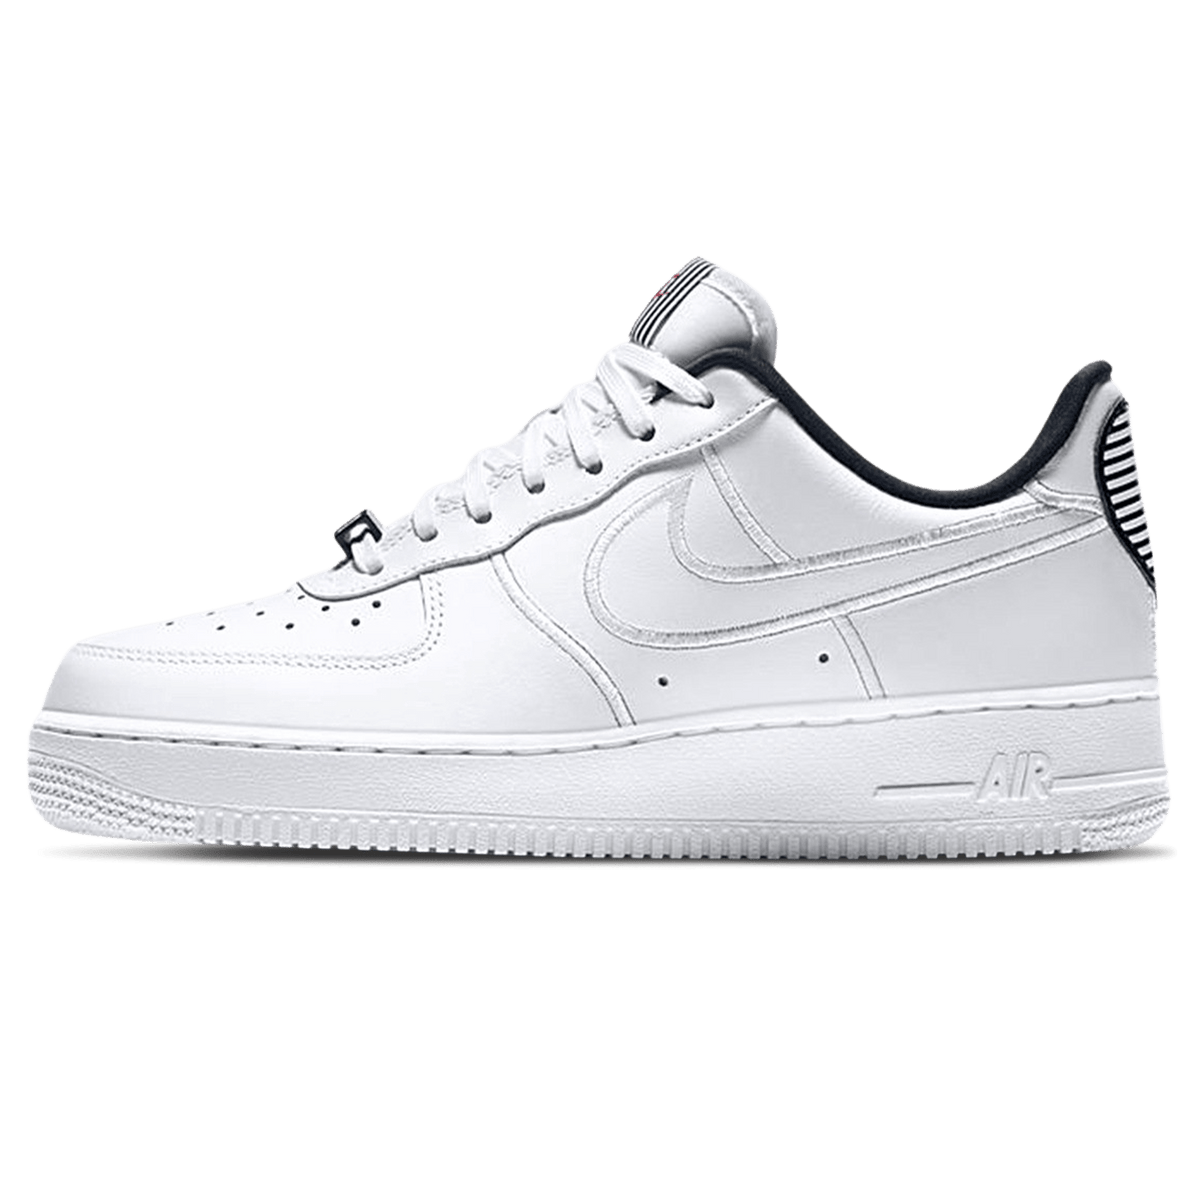 Air Force 1 07 SE LX Wmns 'Broken Hearted' - Kick Game